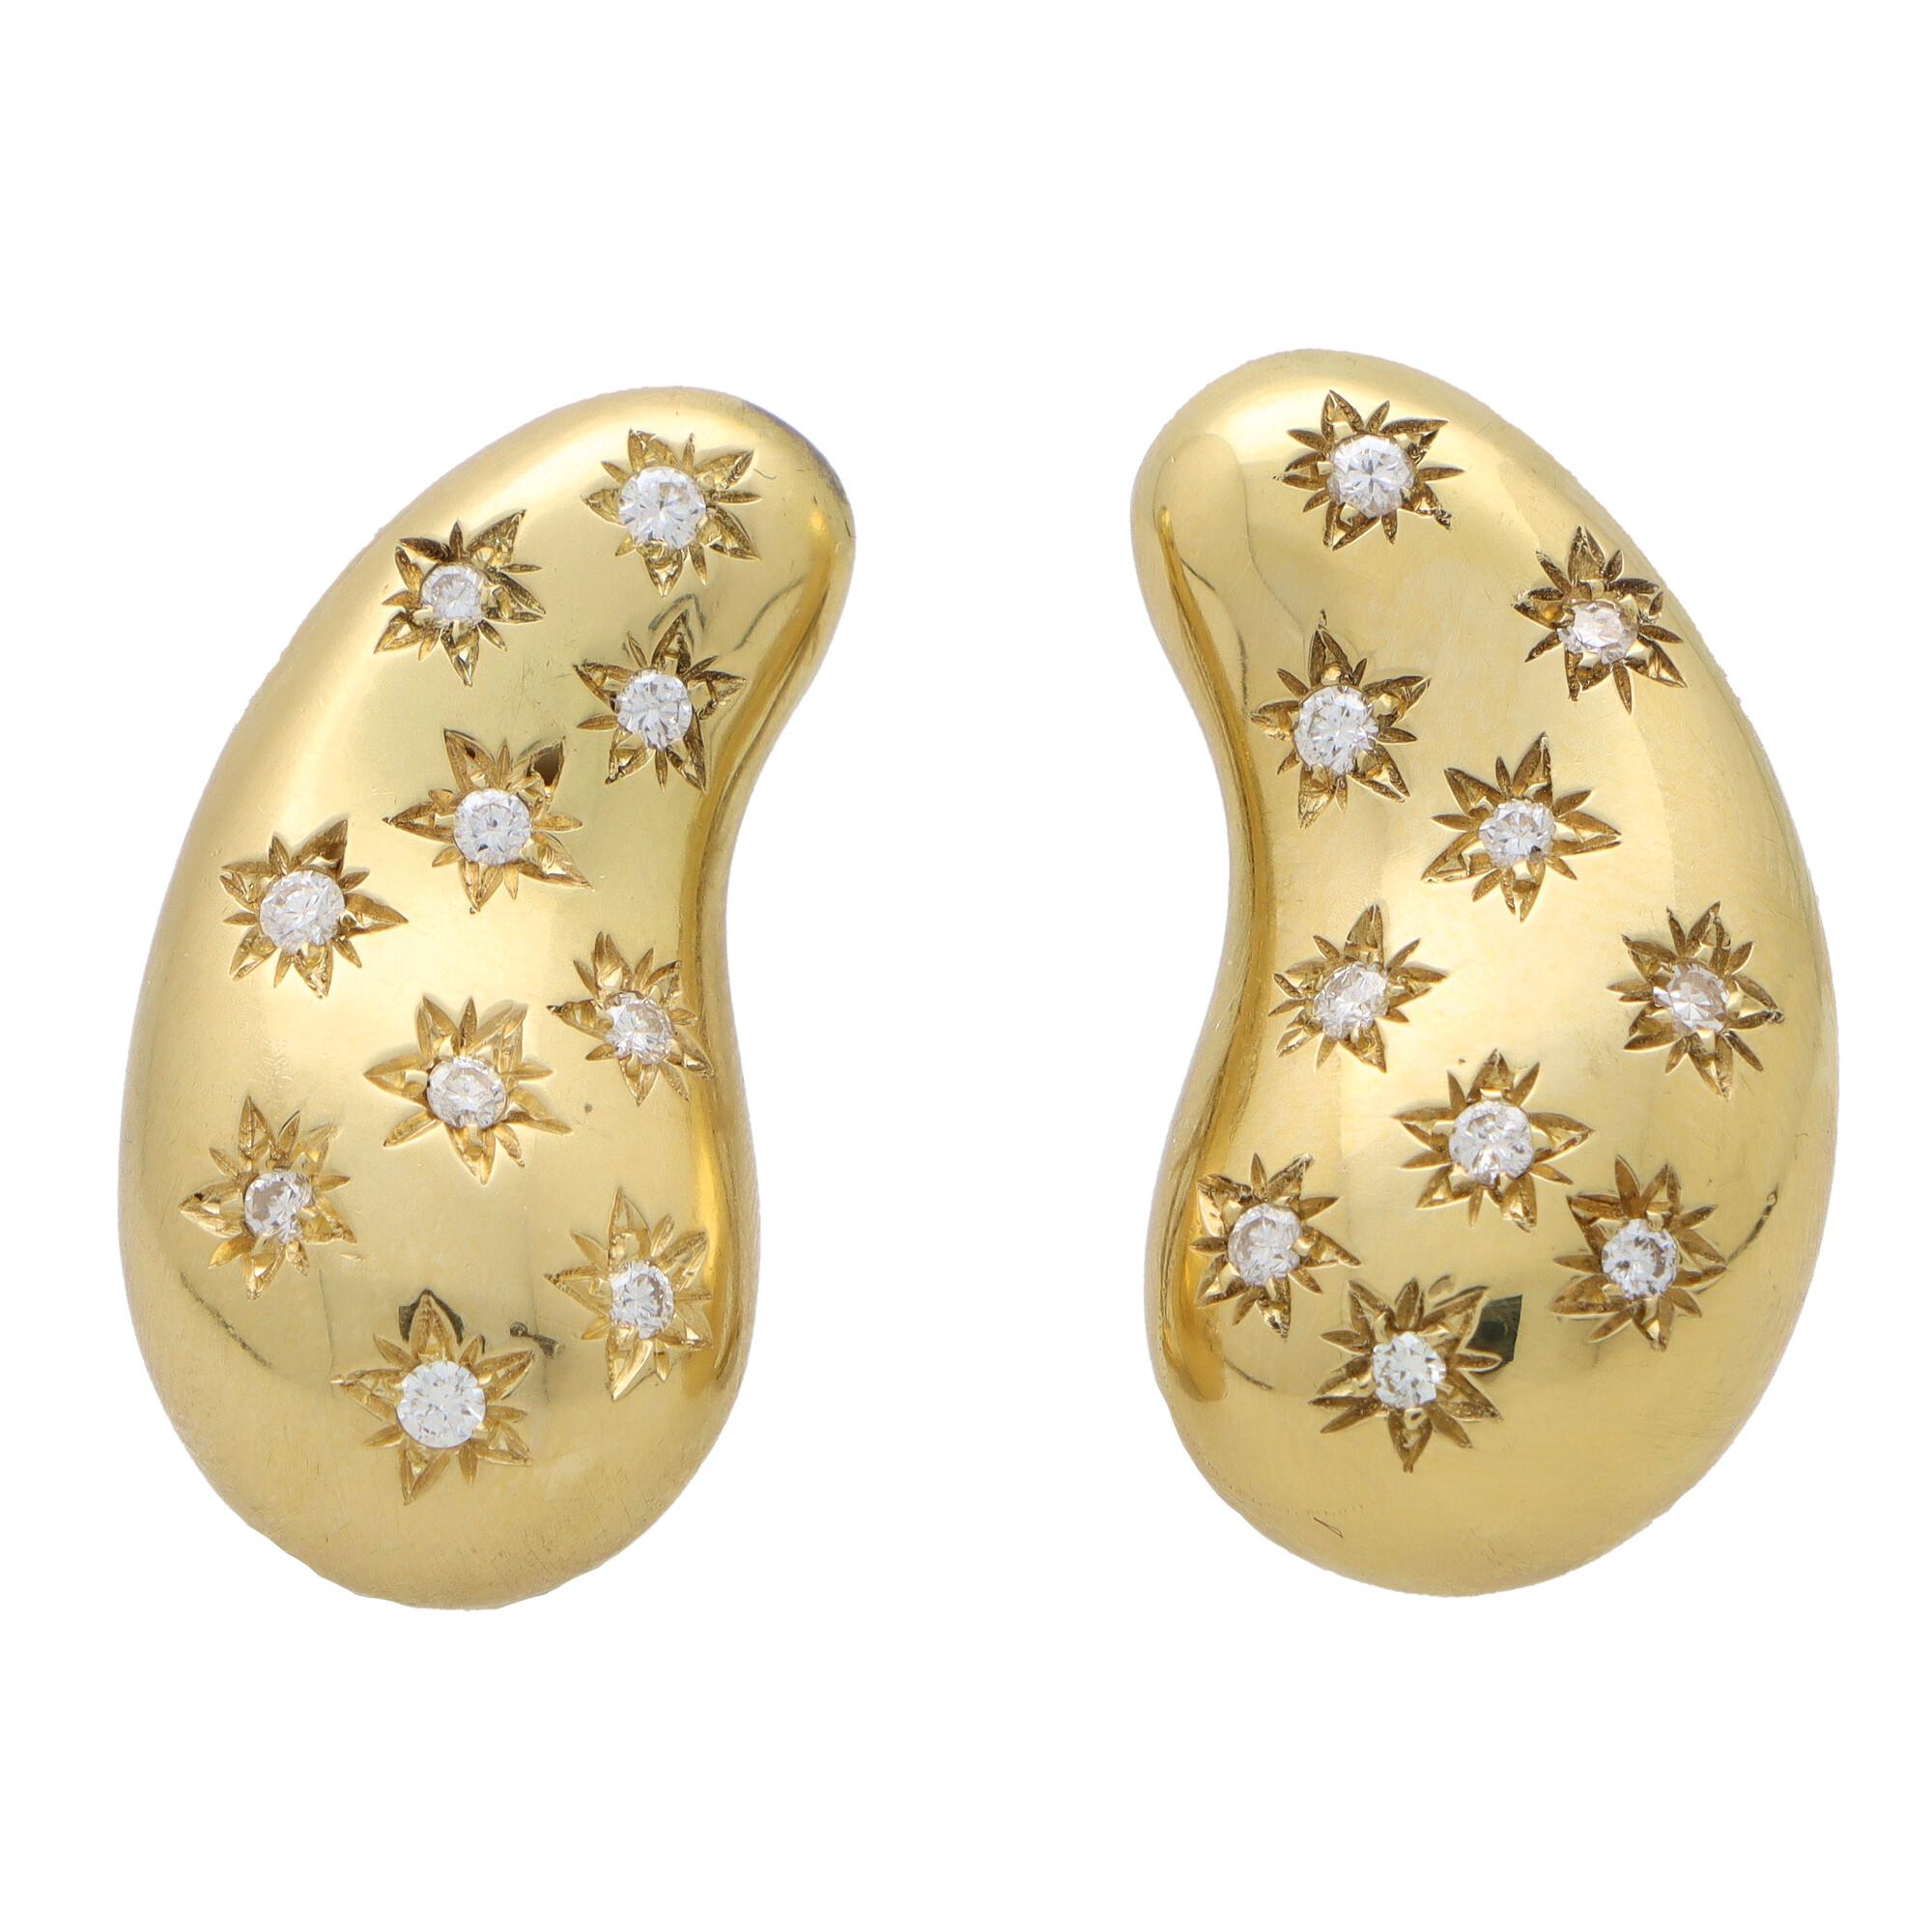  A beautiful vintage pair of Elsa Peretti for Tiffany & Co. diamond bean earrings set in 18k yellow gold. 

Each earring is composed in the iconic Elsa Peretti bean motif, bezel set throughout with ten round brilliant cut diamonds. The diamonds are